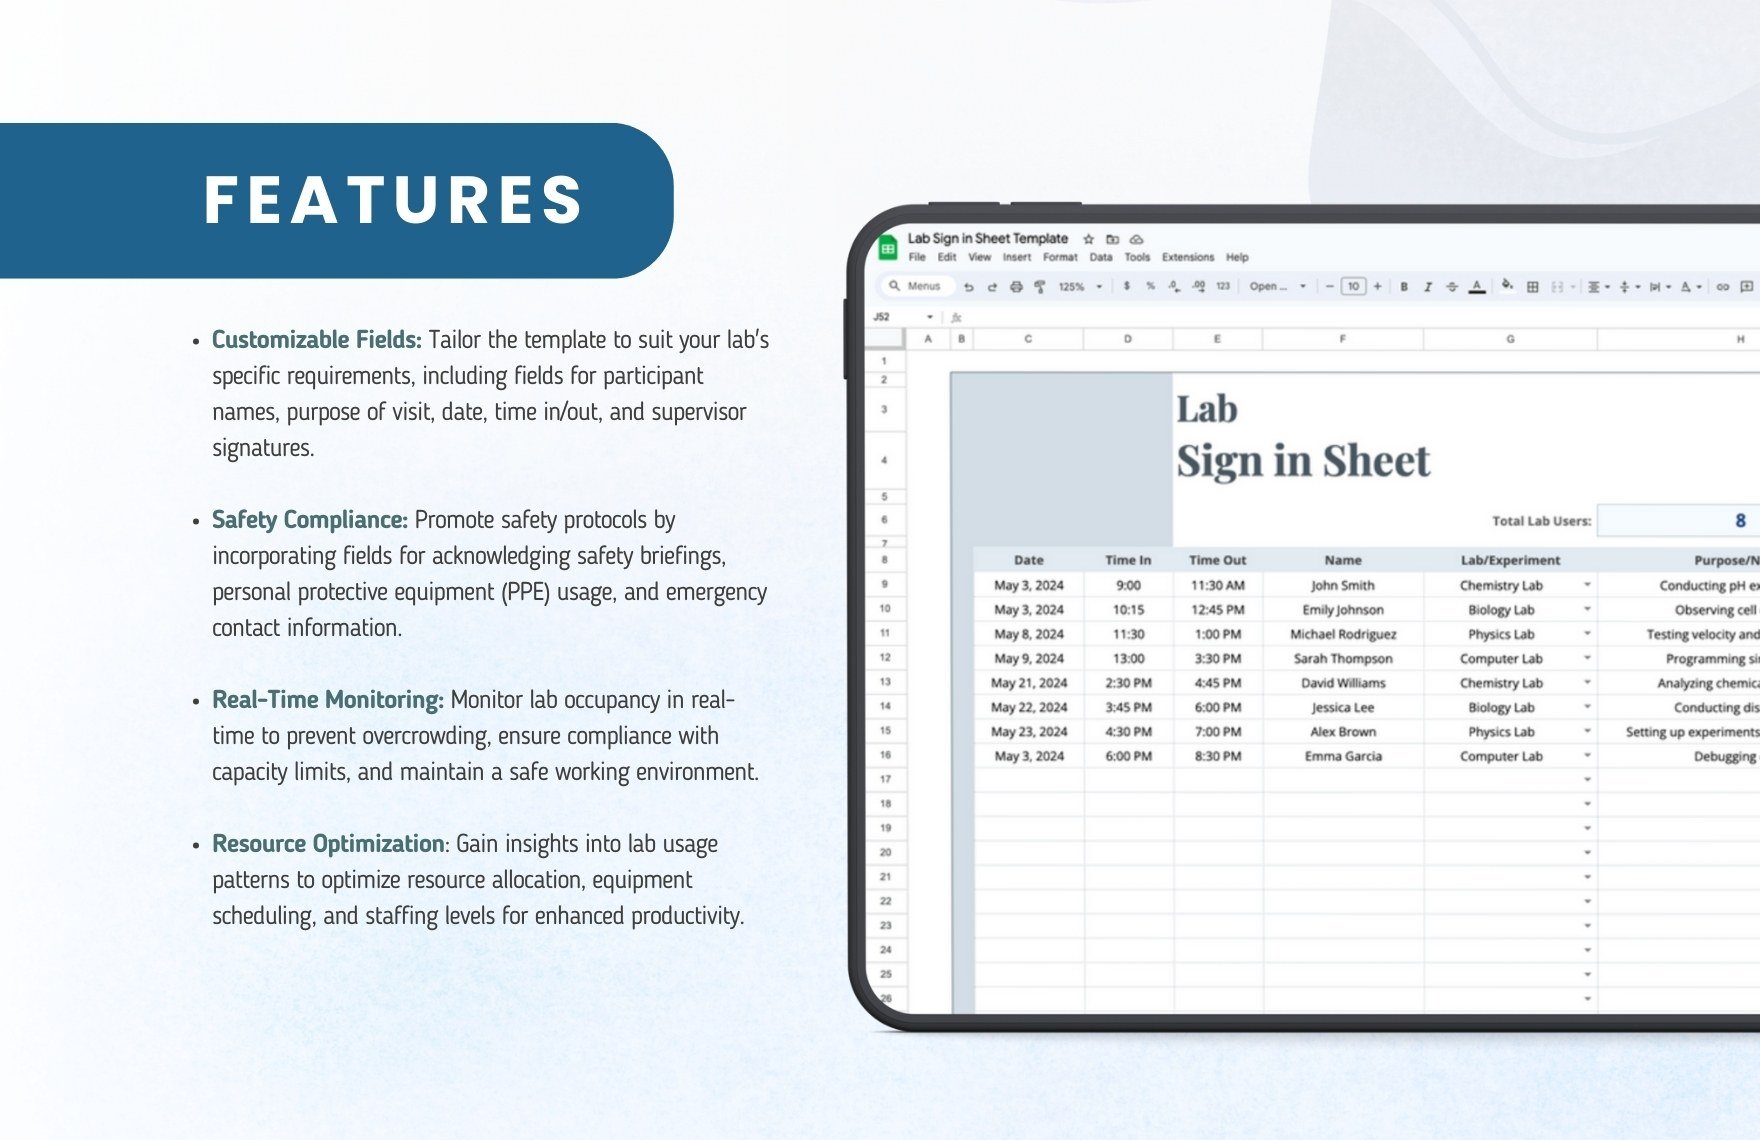 Lab Sign in Sheet Template